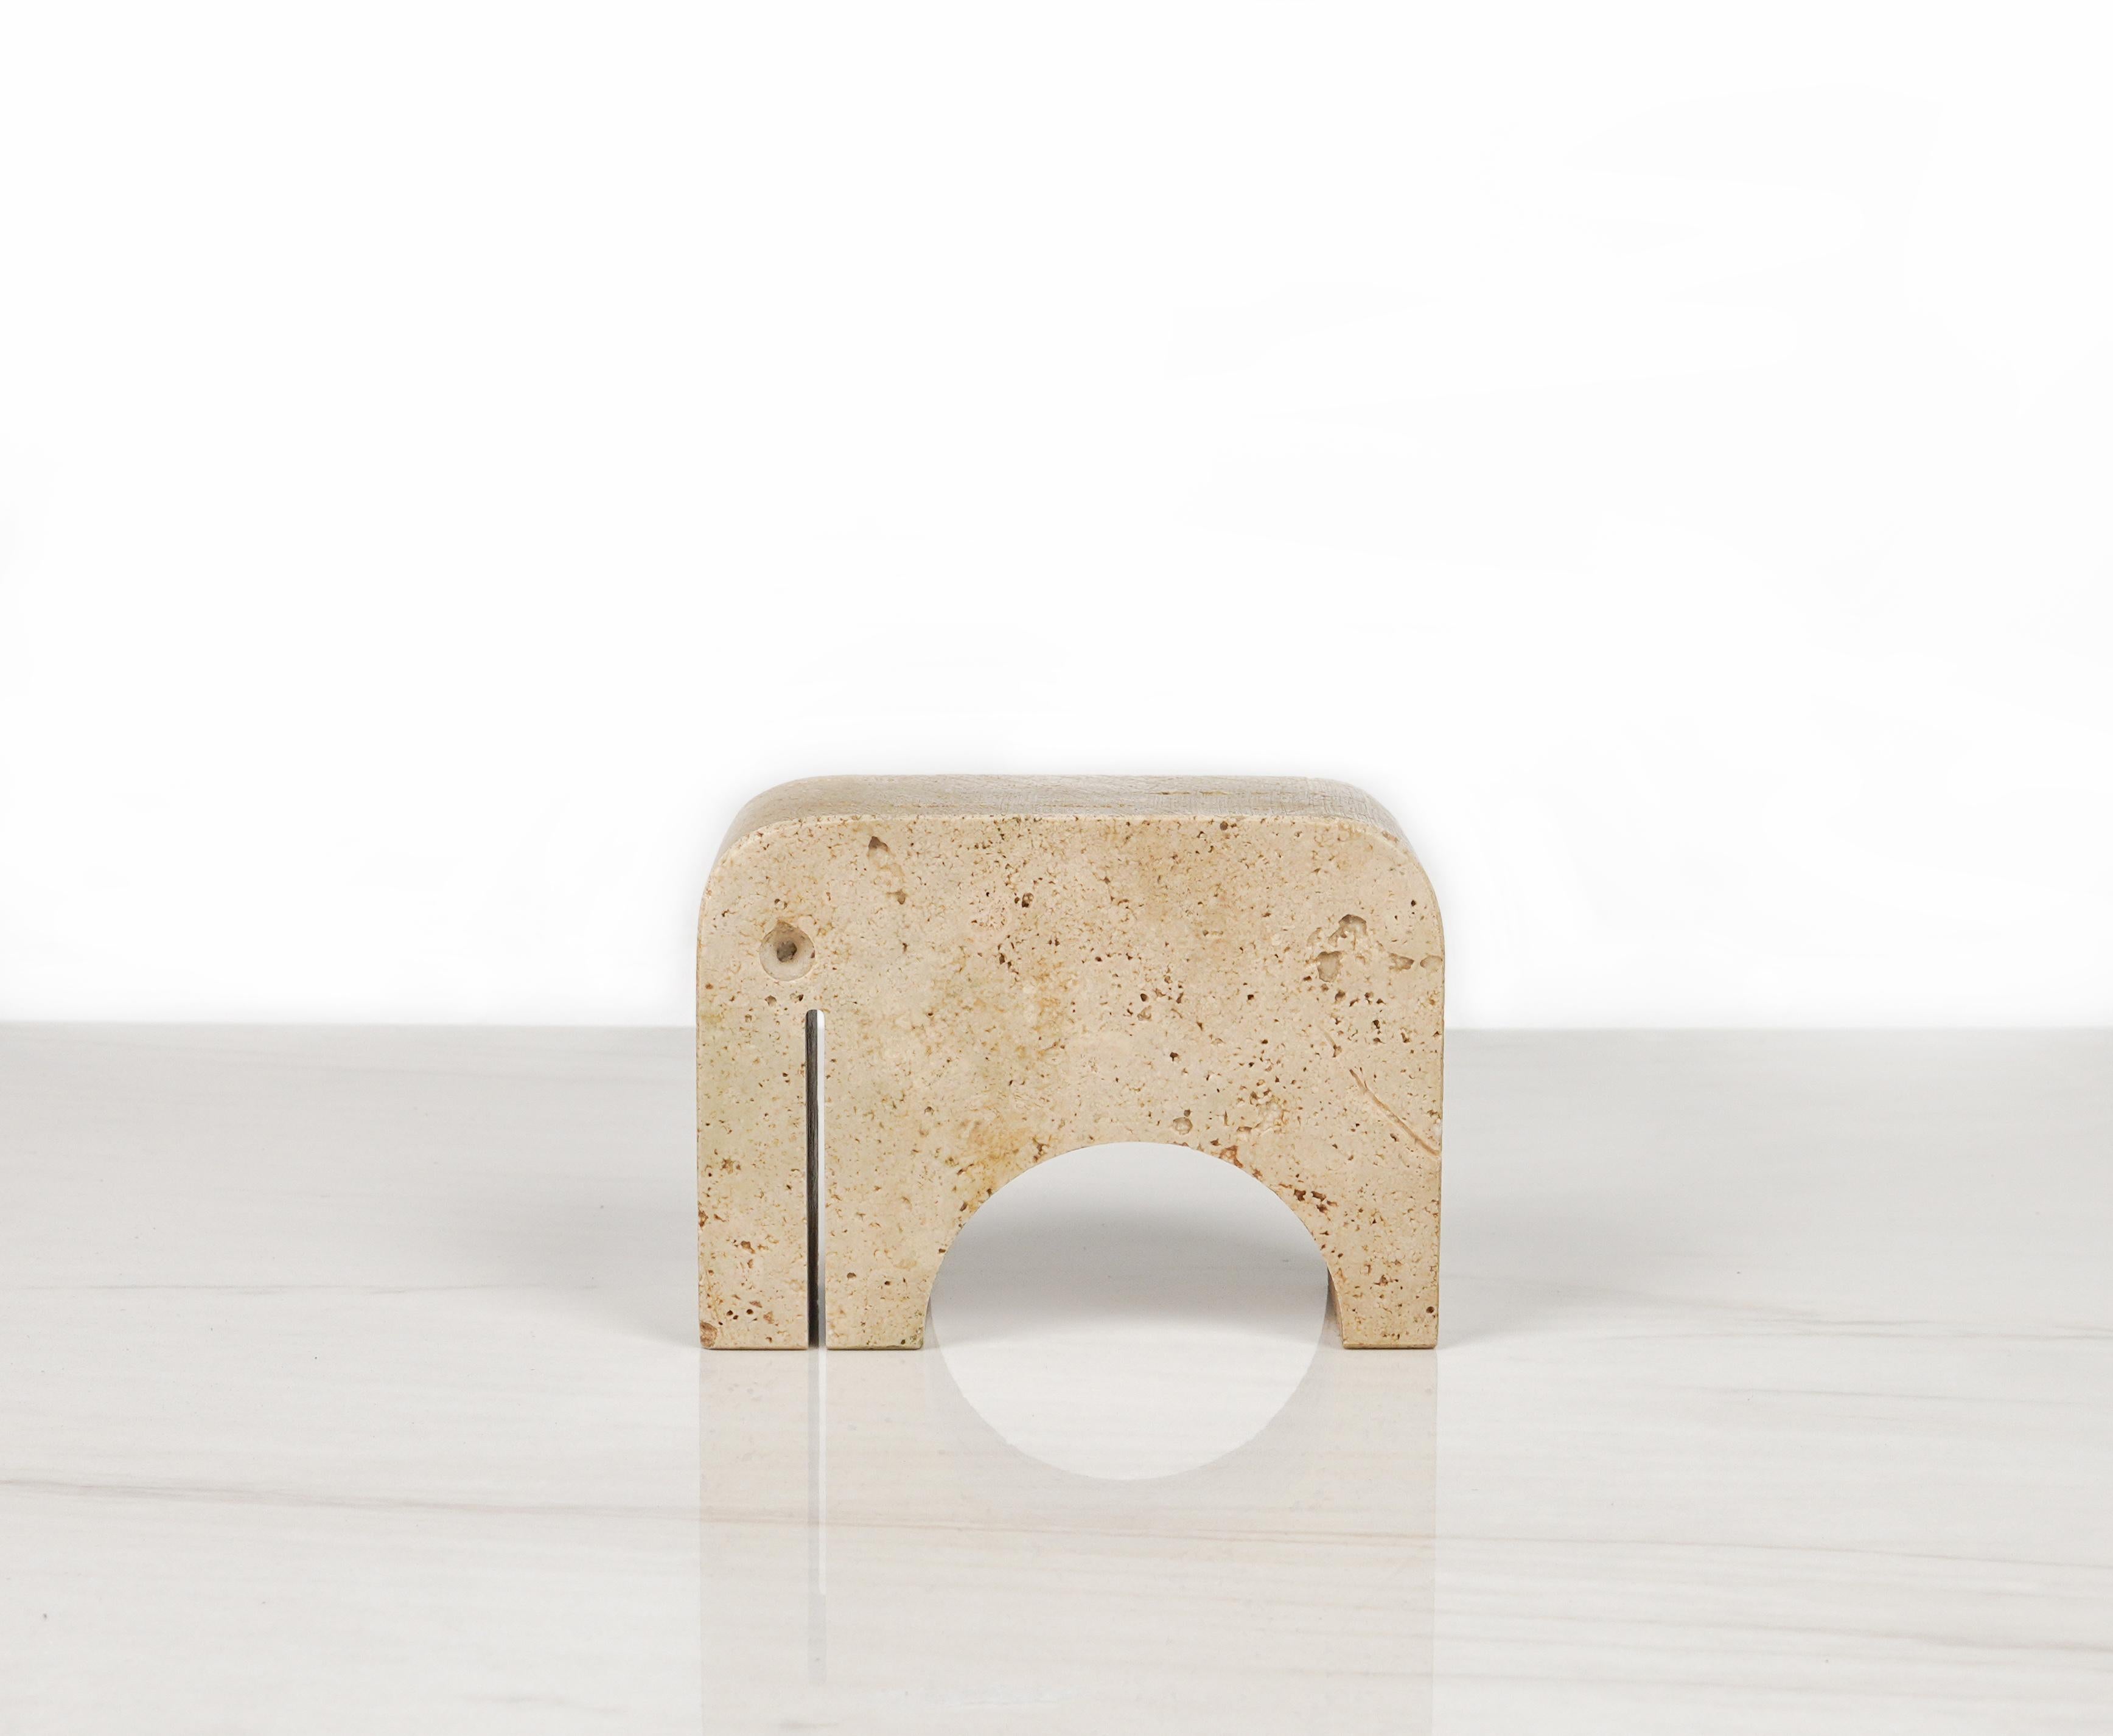 Italian Travertine Elephant Sculpture / Bookend by Fratelli Mannelli, Italy 1970s For Sale